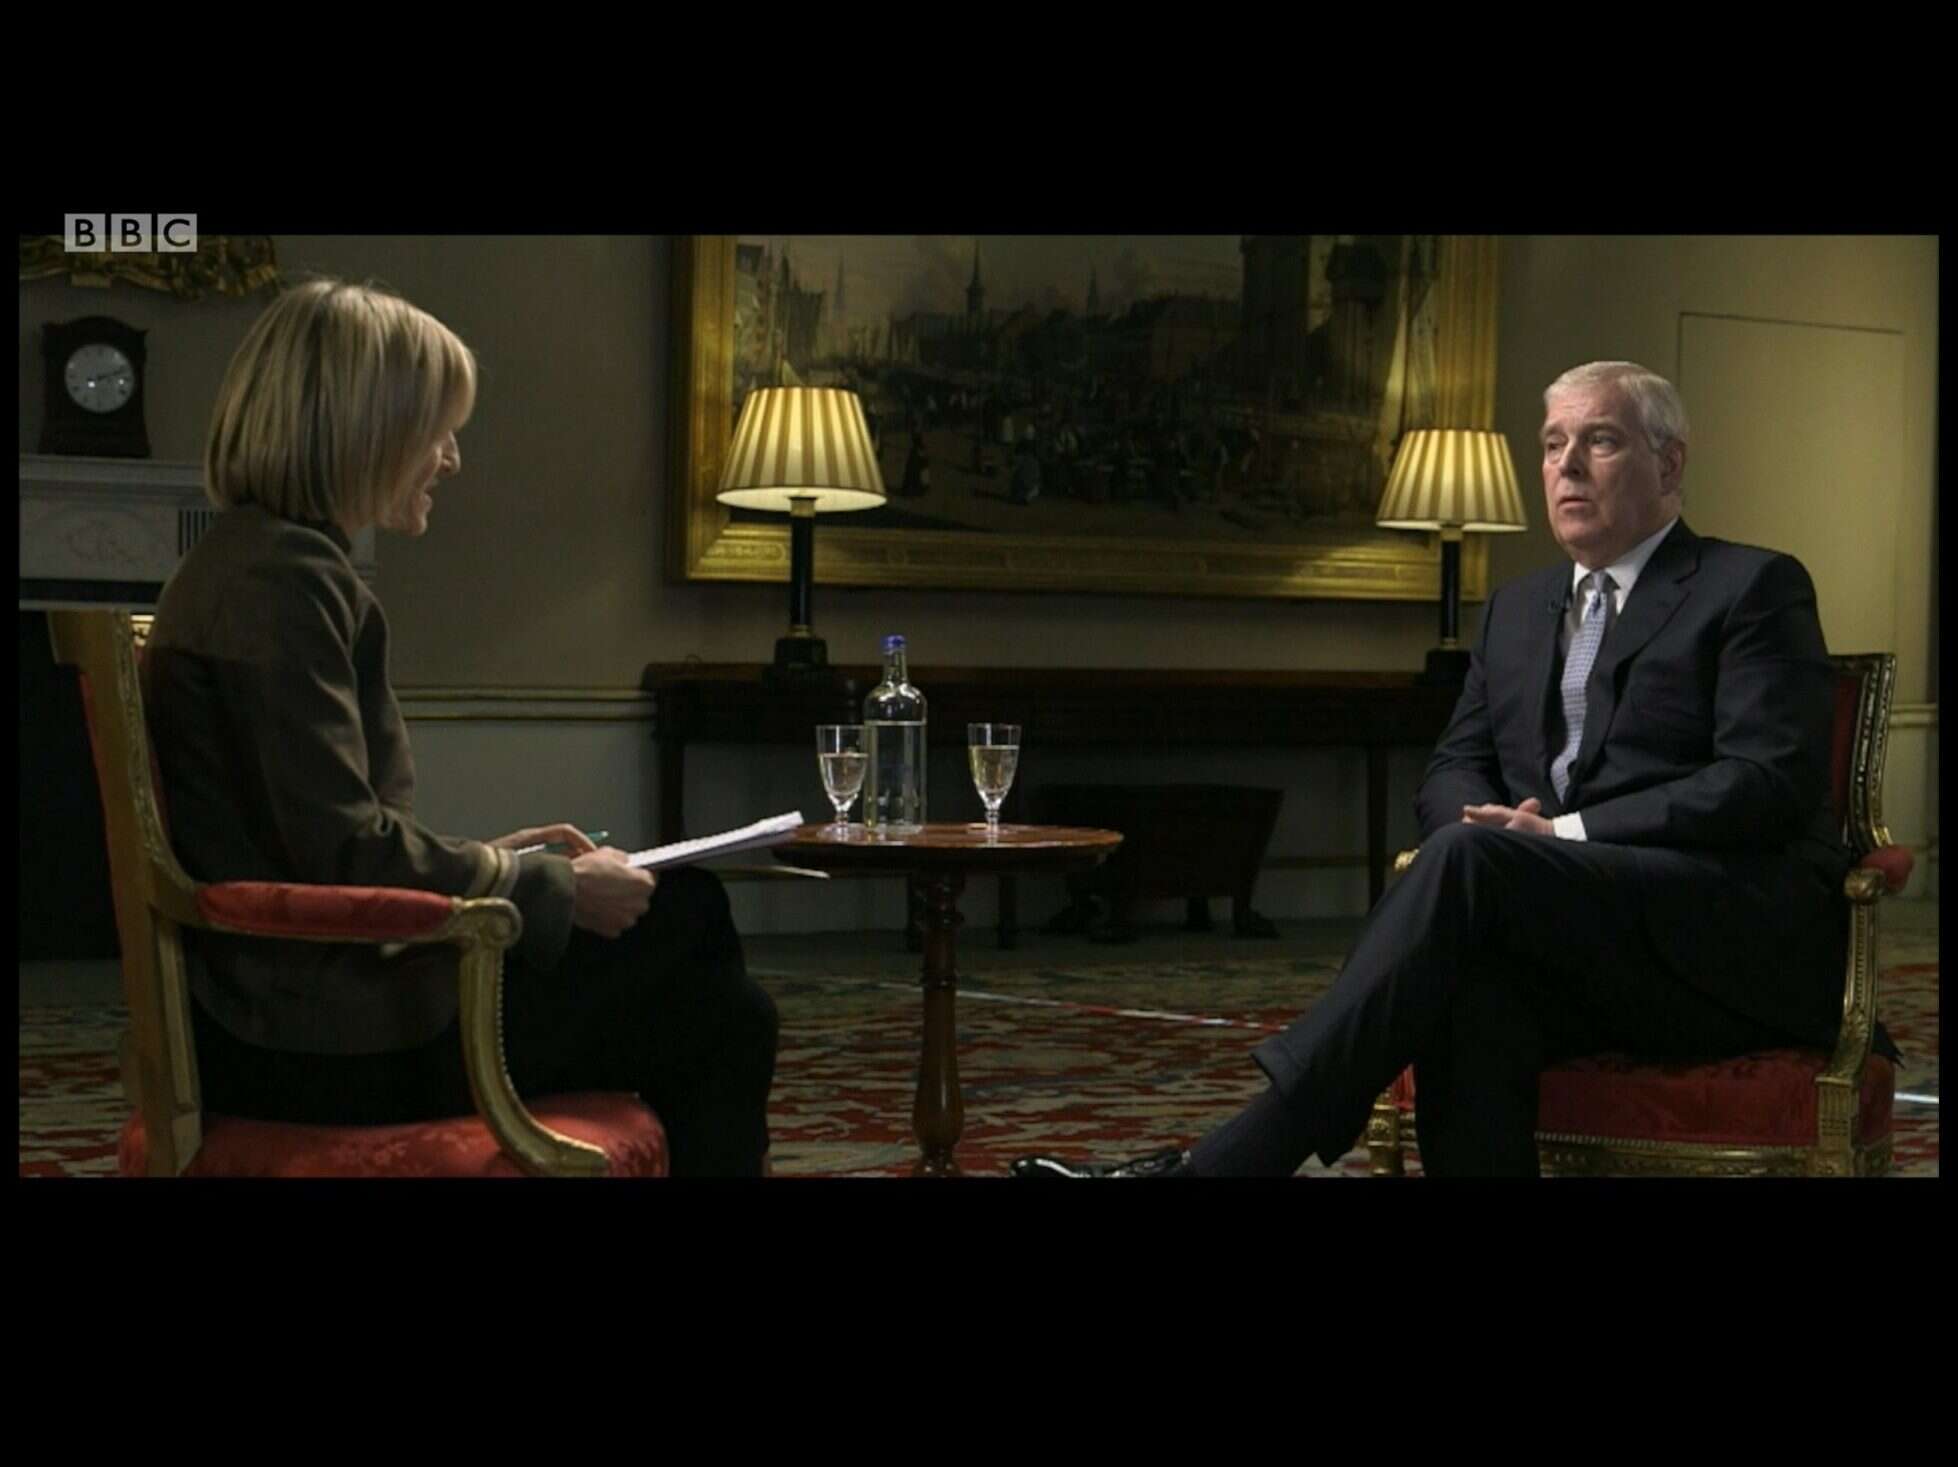 Newsnight declined earlier Prince Andrew interview over Epstein 'red lines', Emily Maitlis reveals